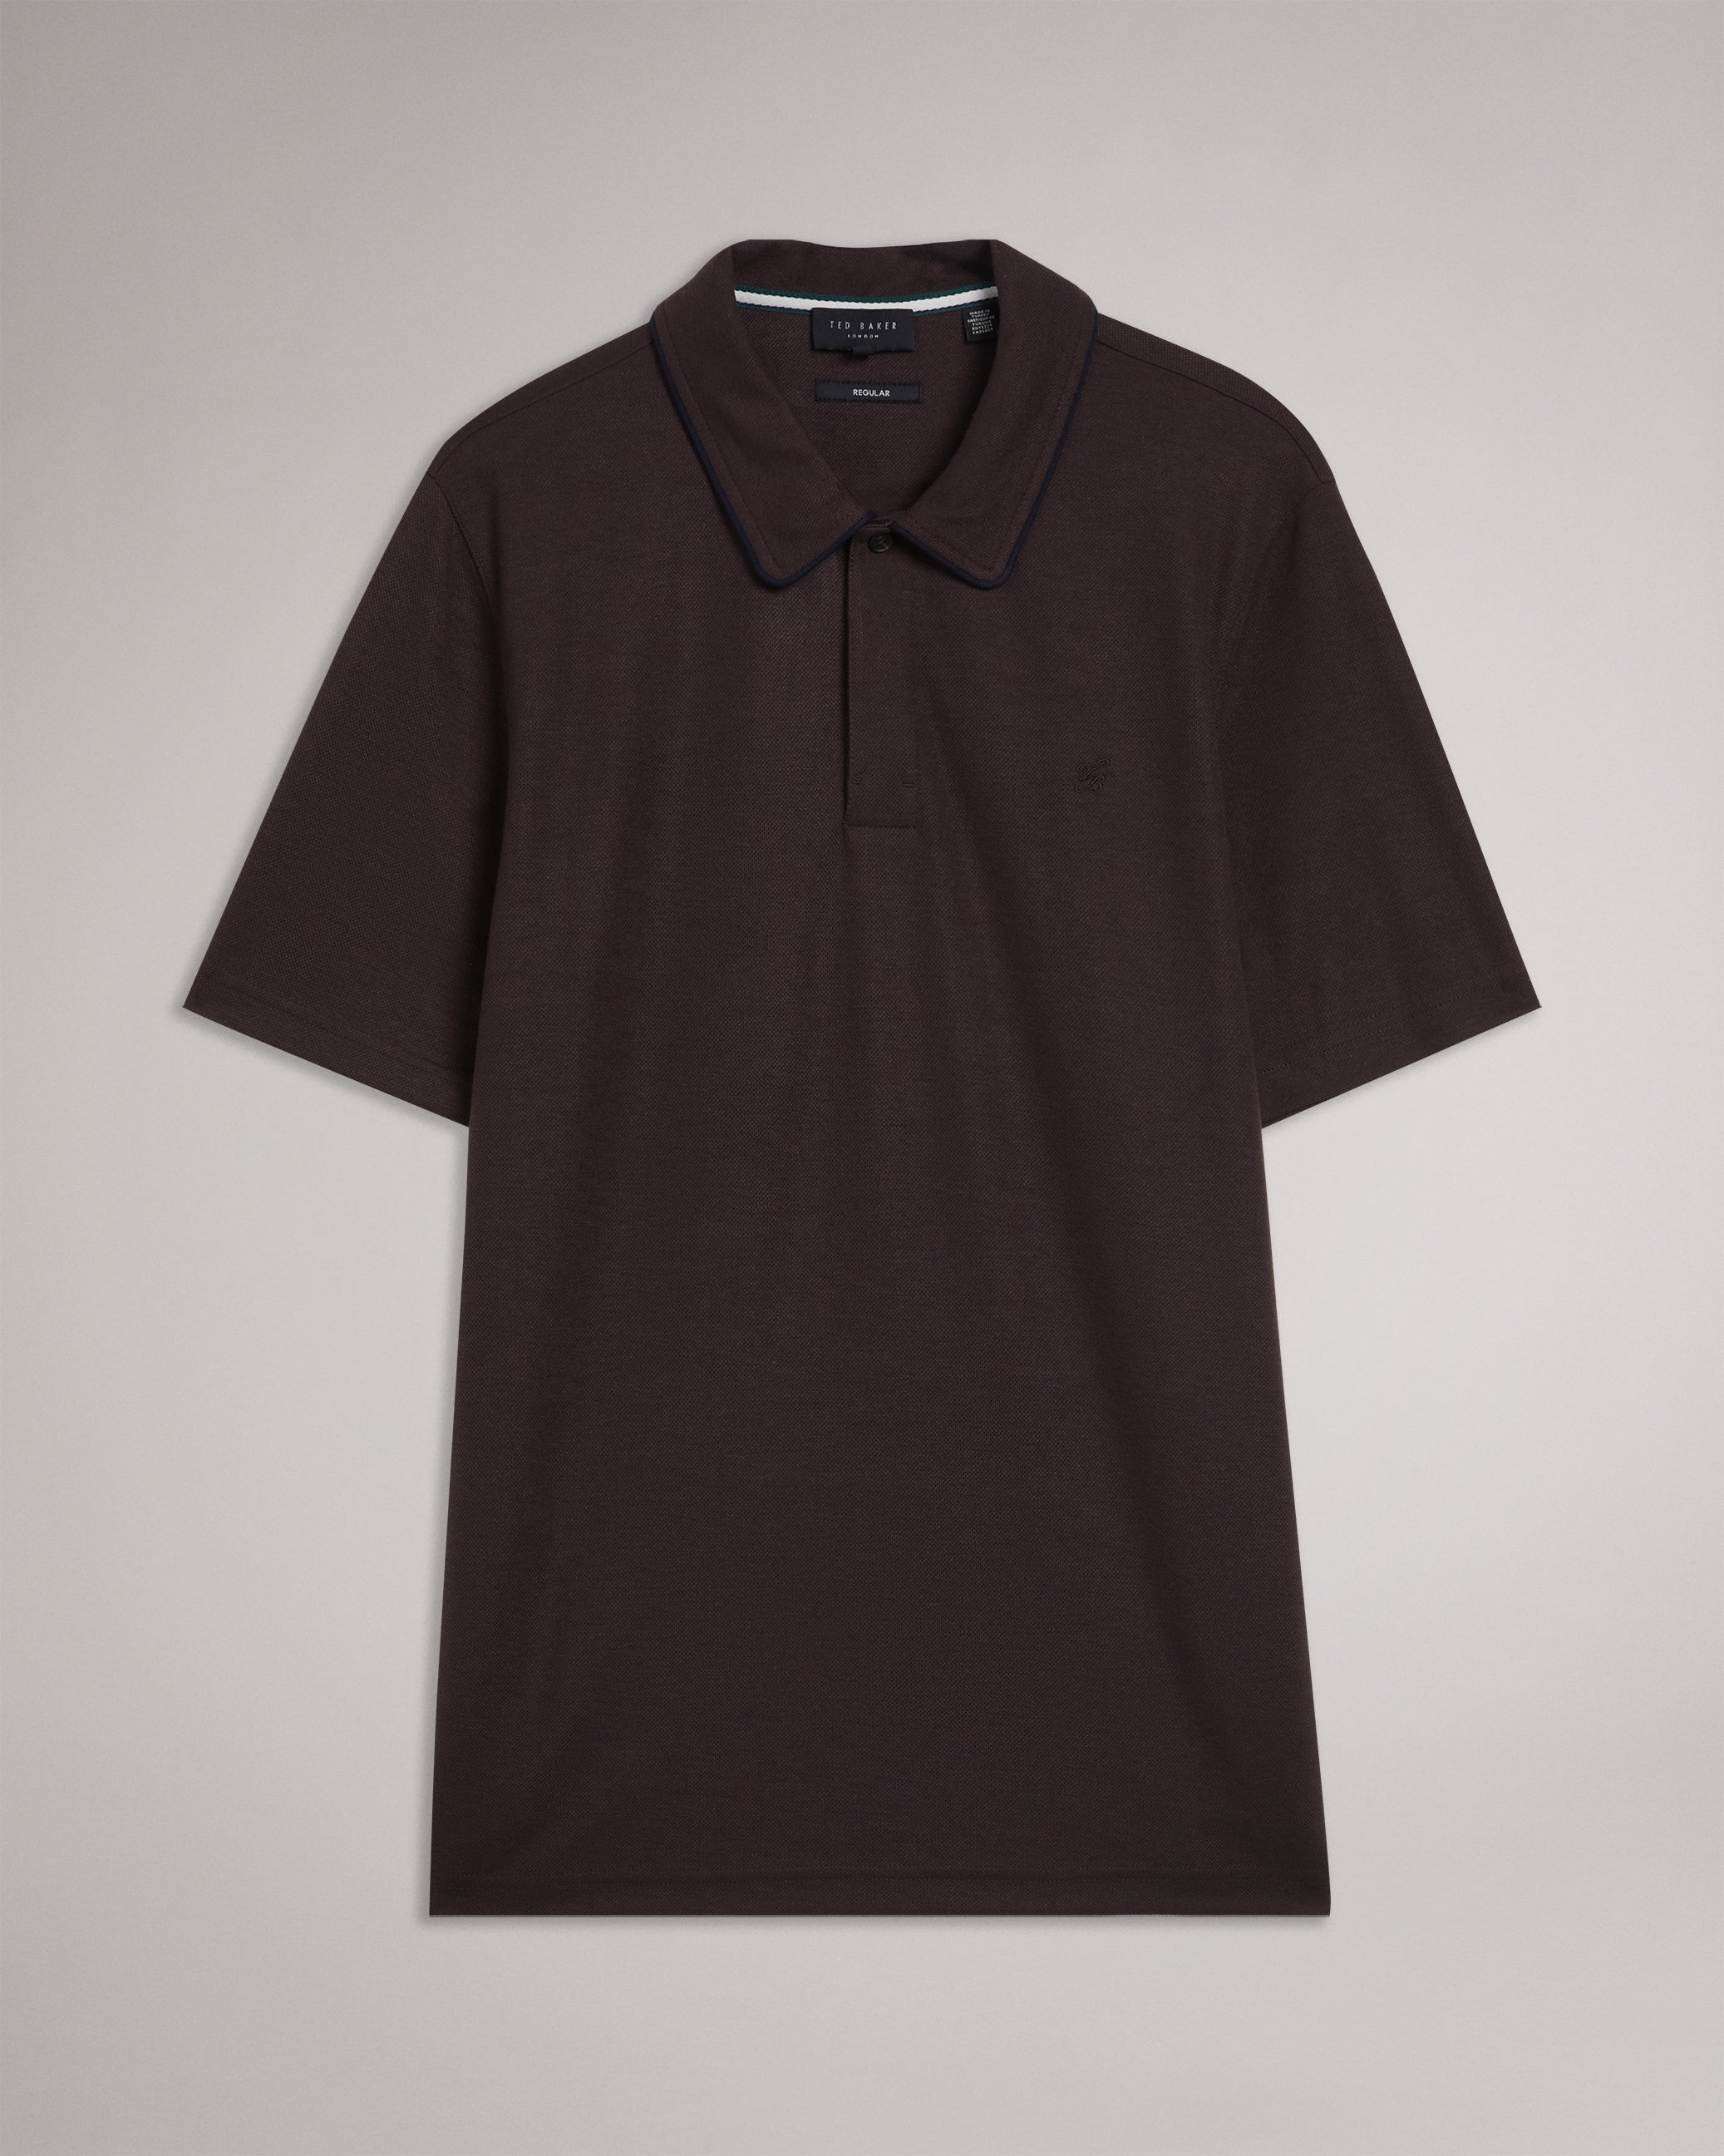 Aroue Short Sleeve Polo Shirt With Suedette Trim Brn-Choc